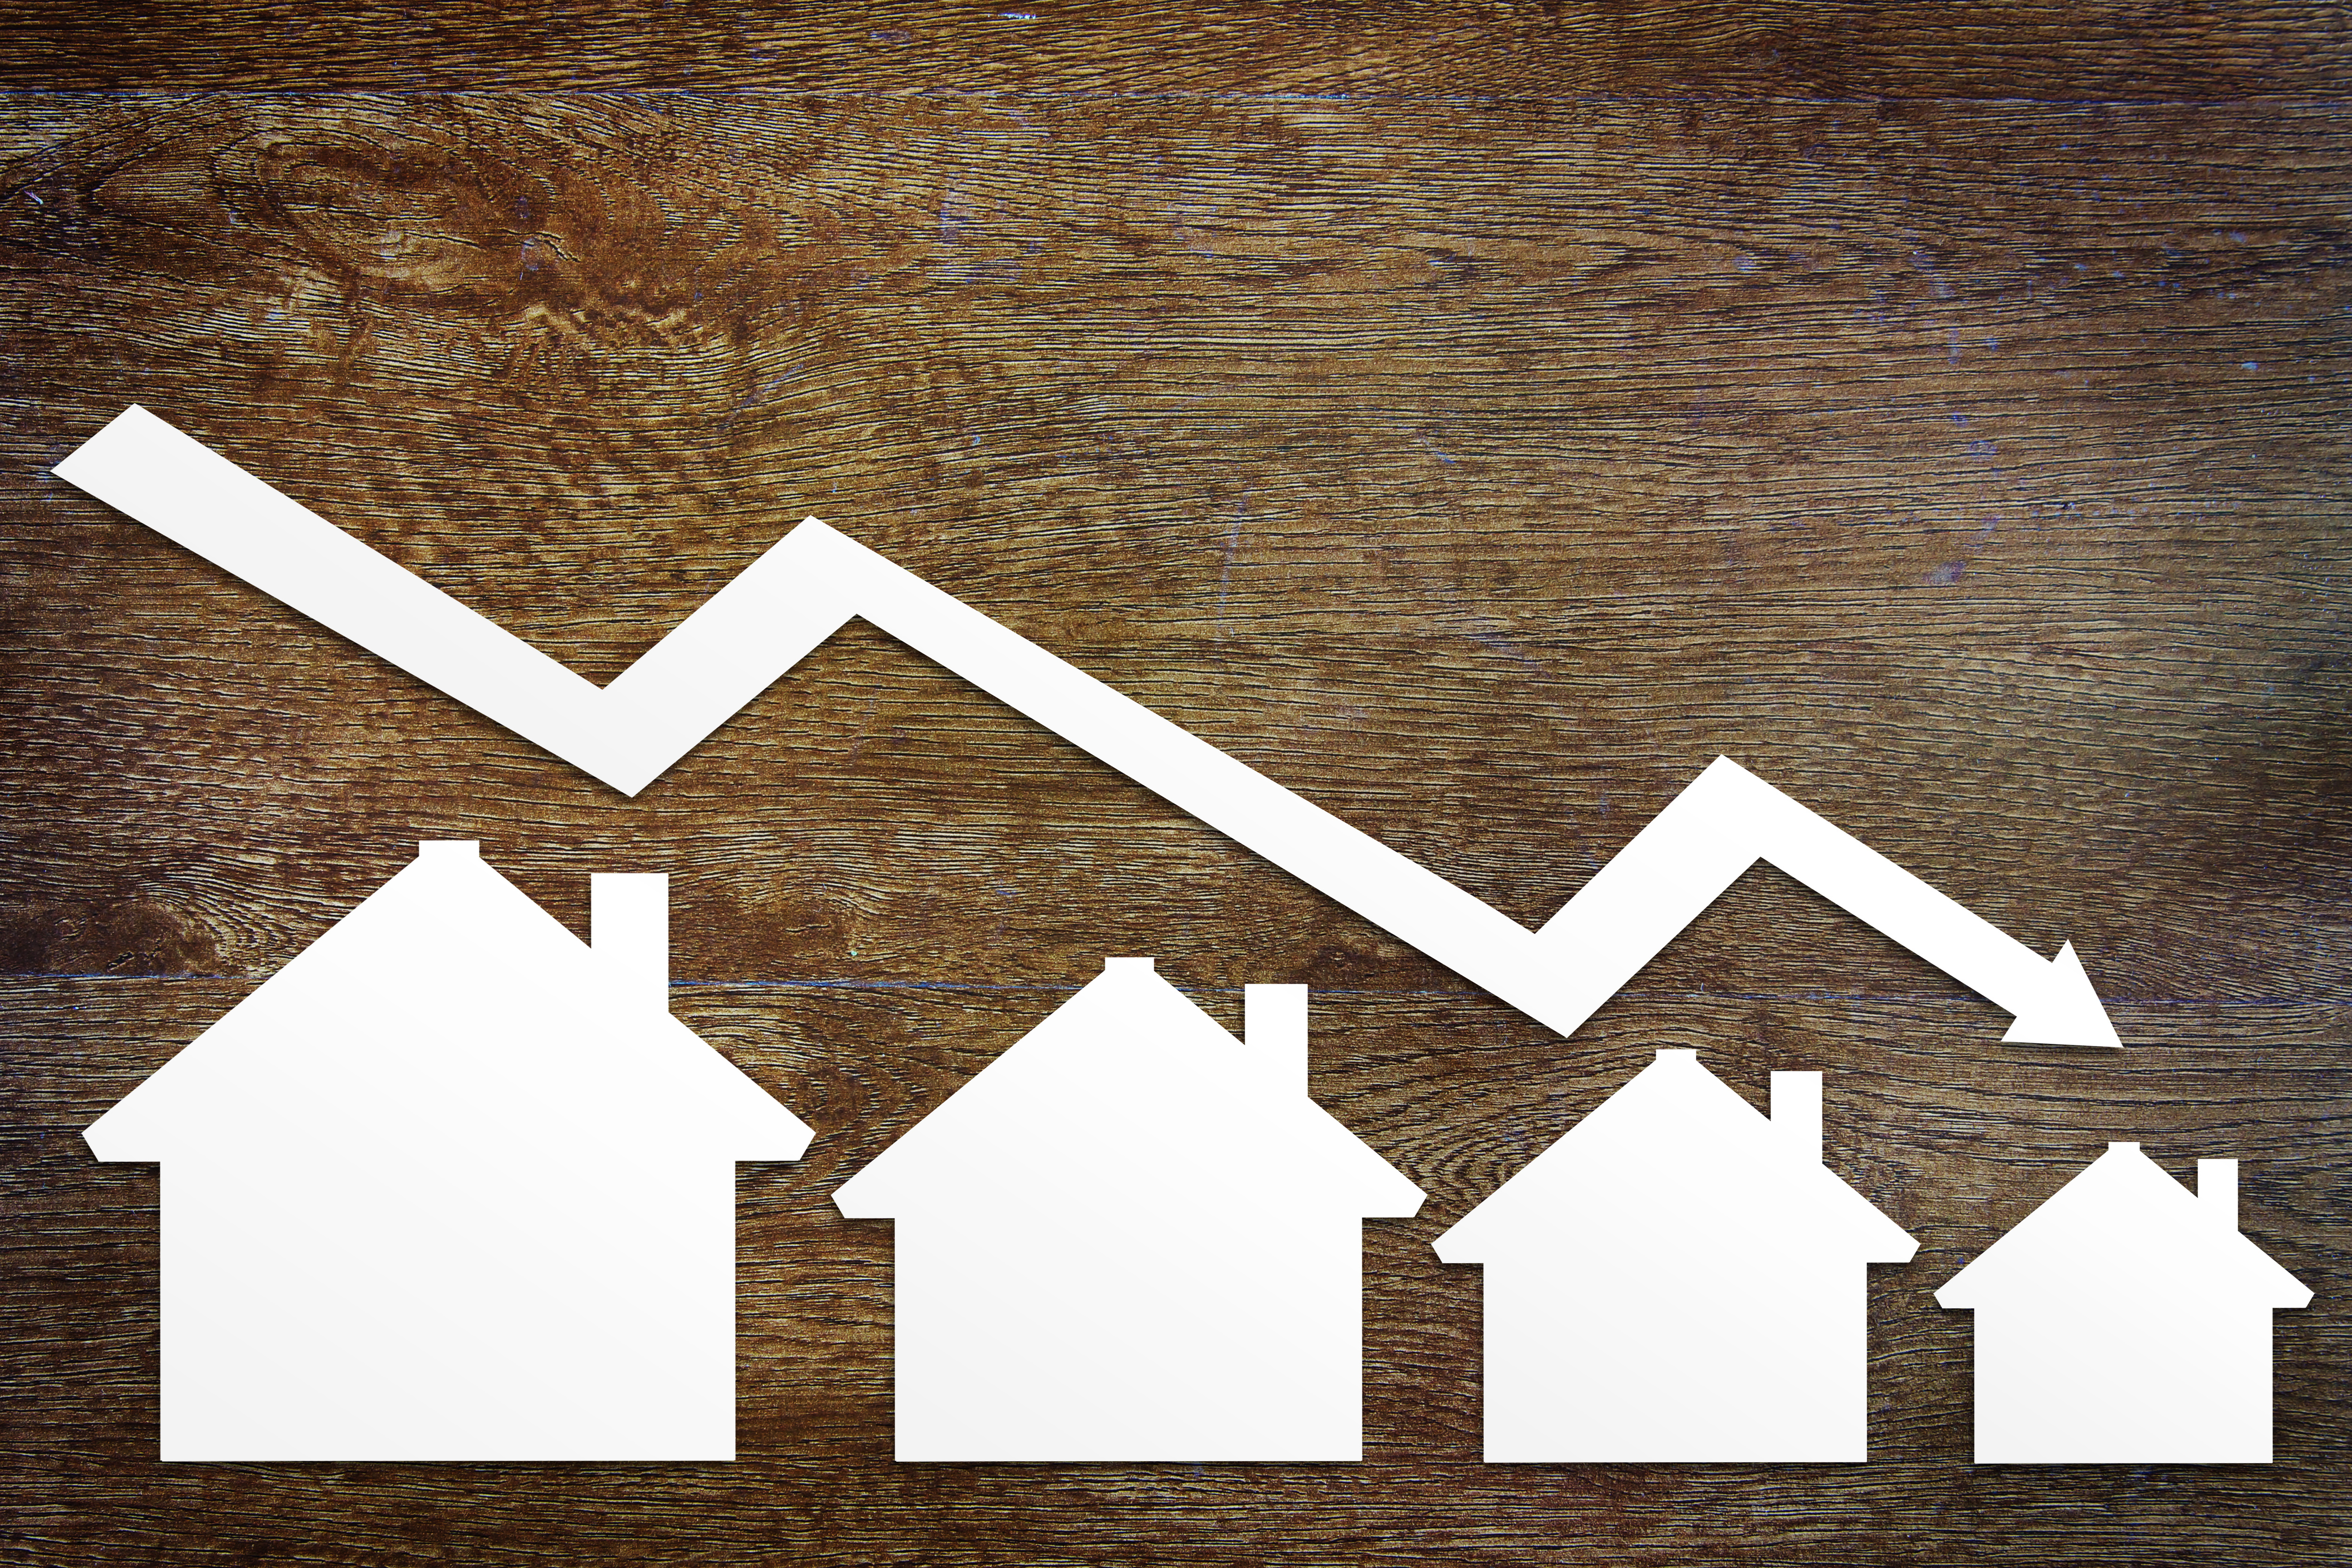 House prices dip in August but remain 6.9% up over the full year